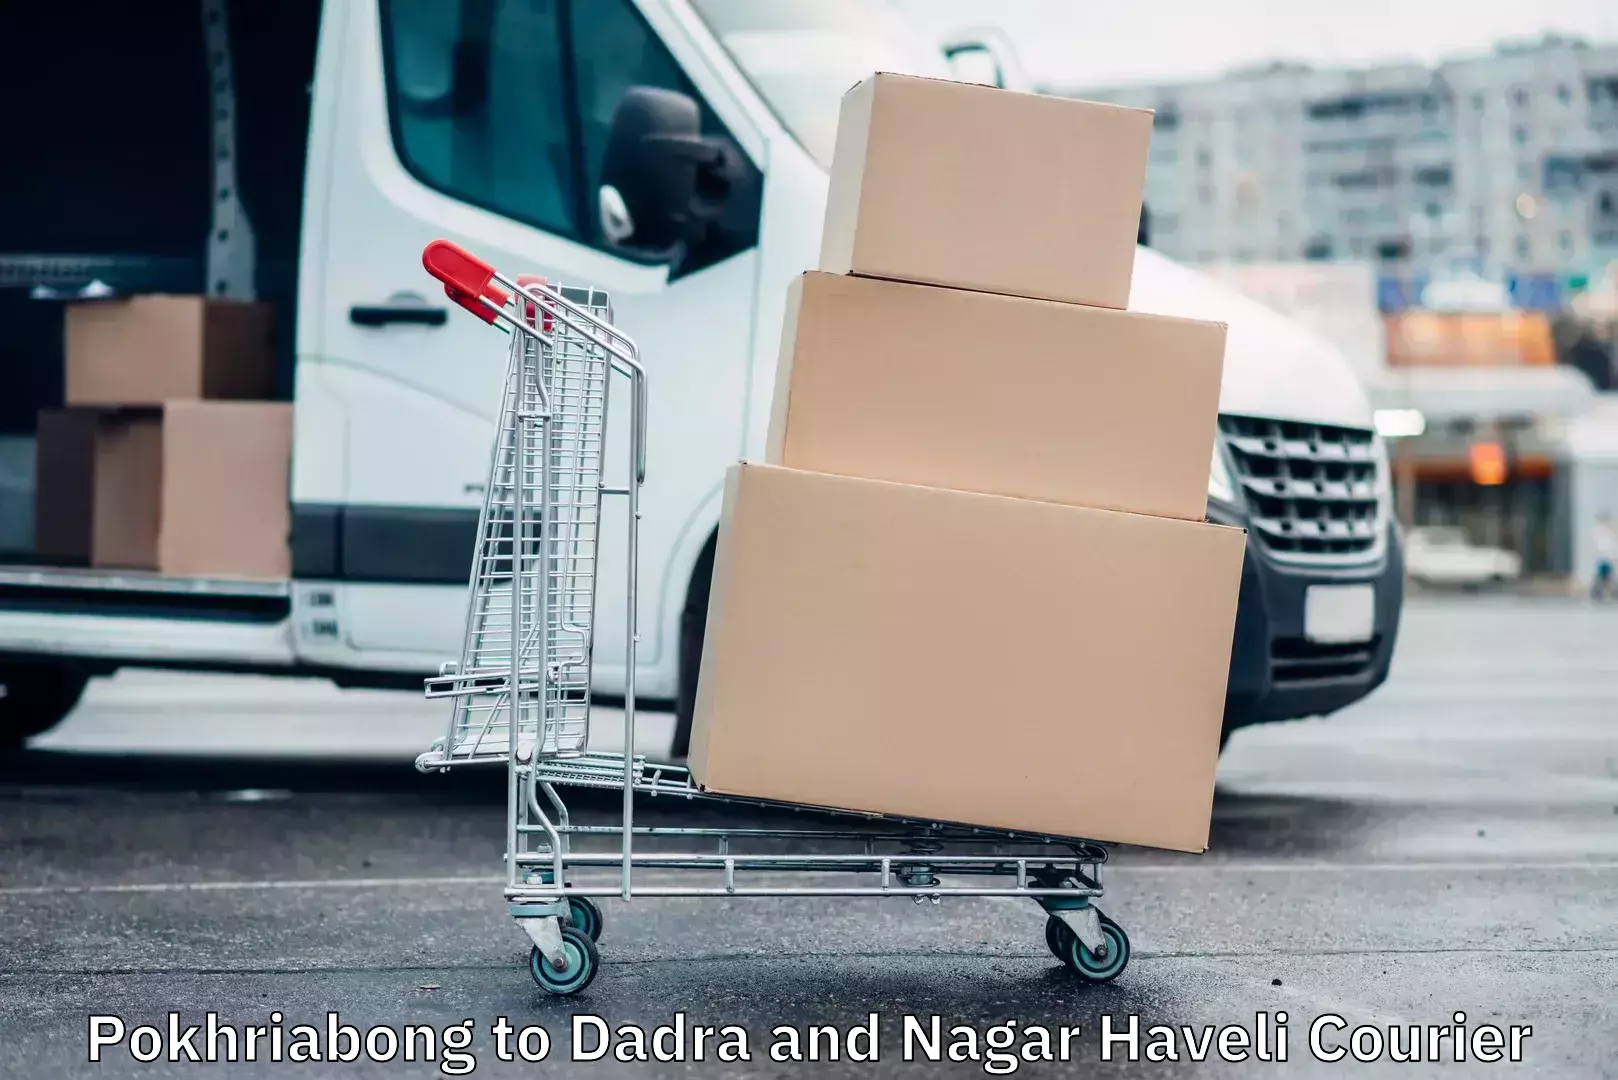 Parcel service for businesses Pokhriabong to Dadra and Nagar Haveli